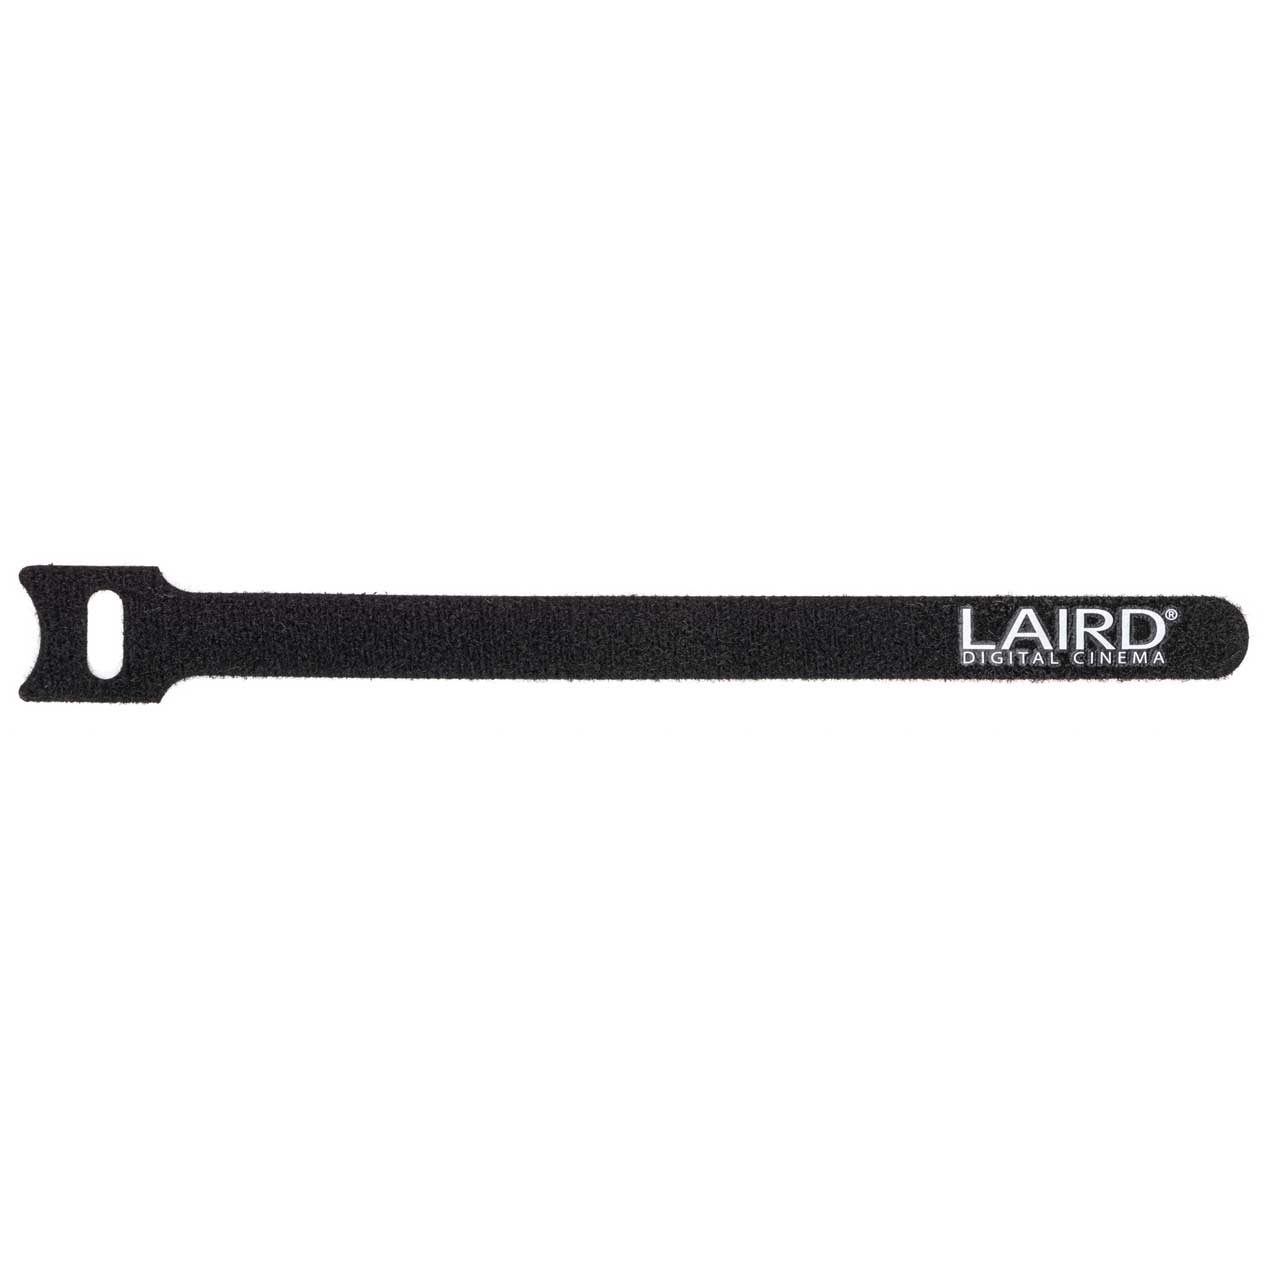 Laird Hook and Loop Cable Wrap 12mm x 180mm Black with White Logo - 250 Pack LDC-HKNLP-250PK